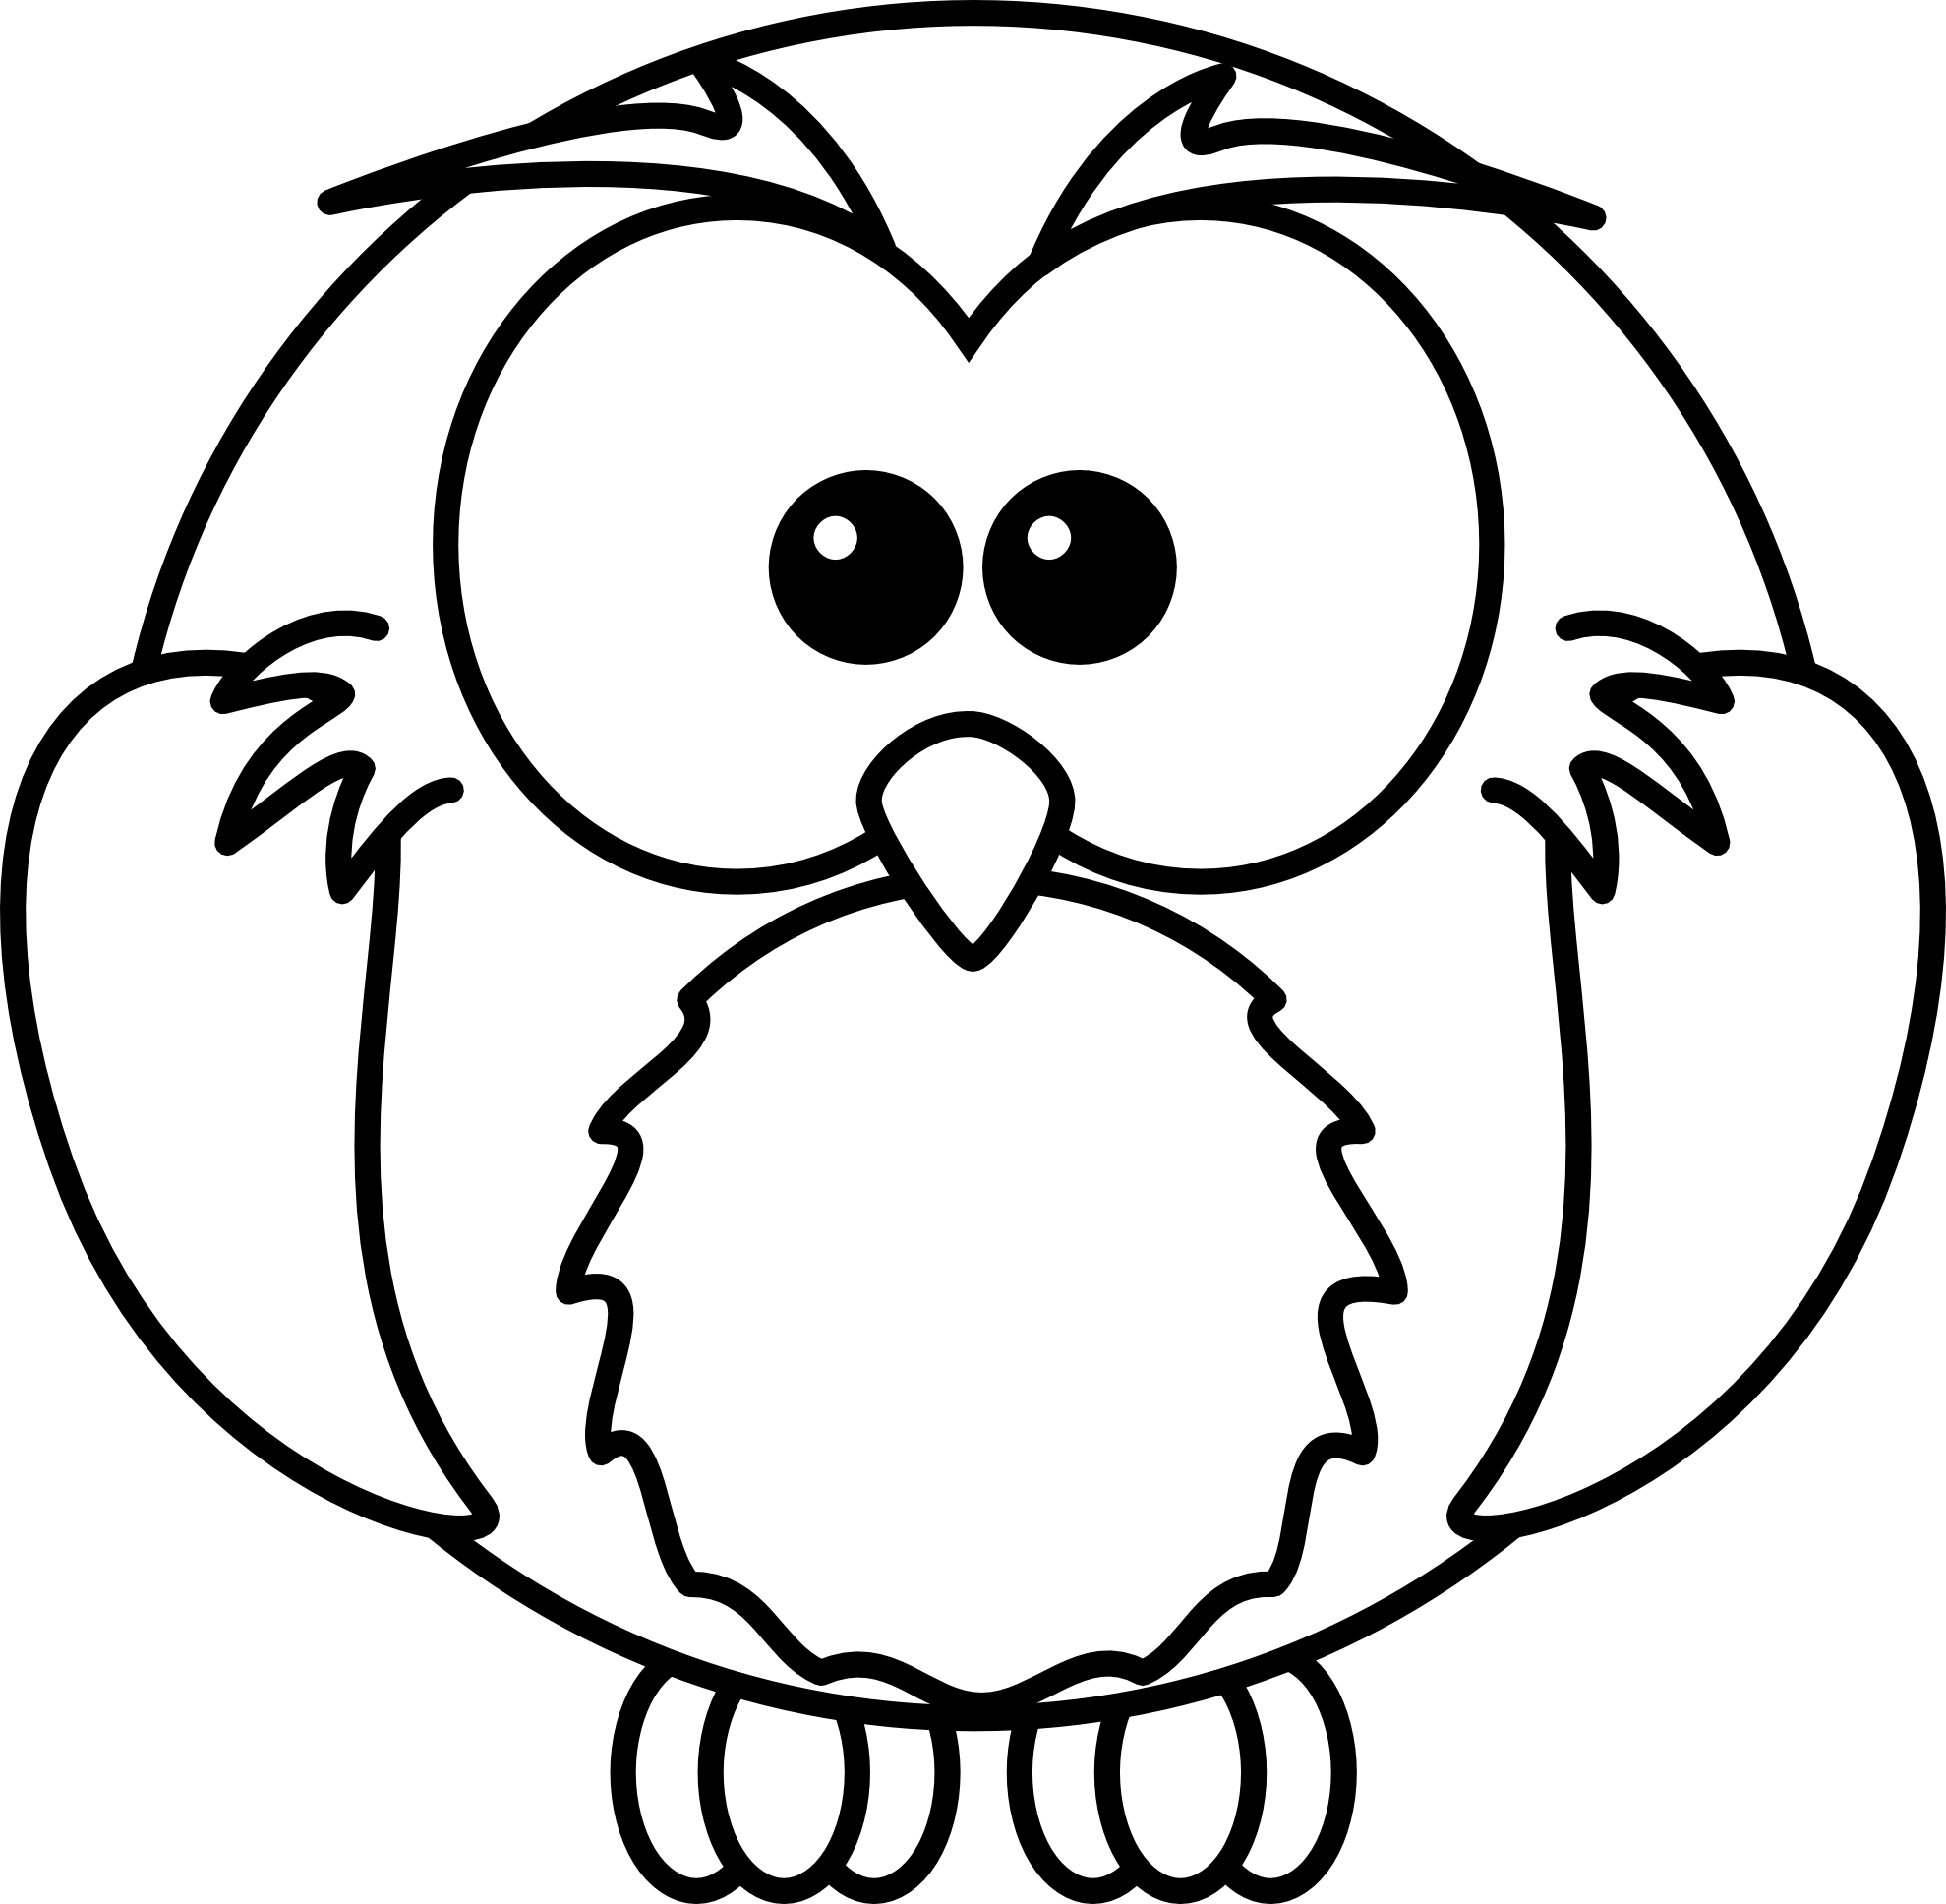 free owl clipart black and white - photo #20